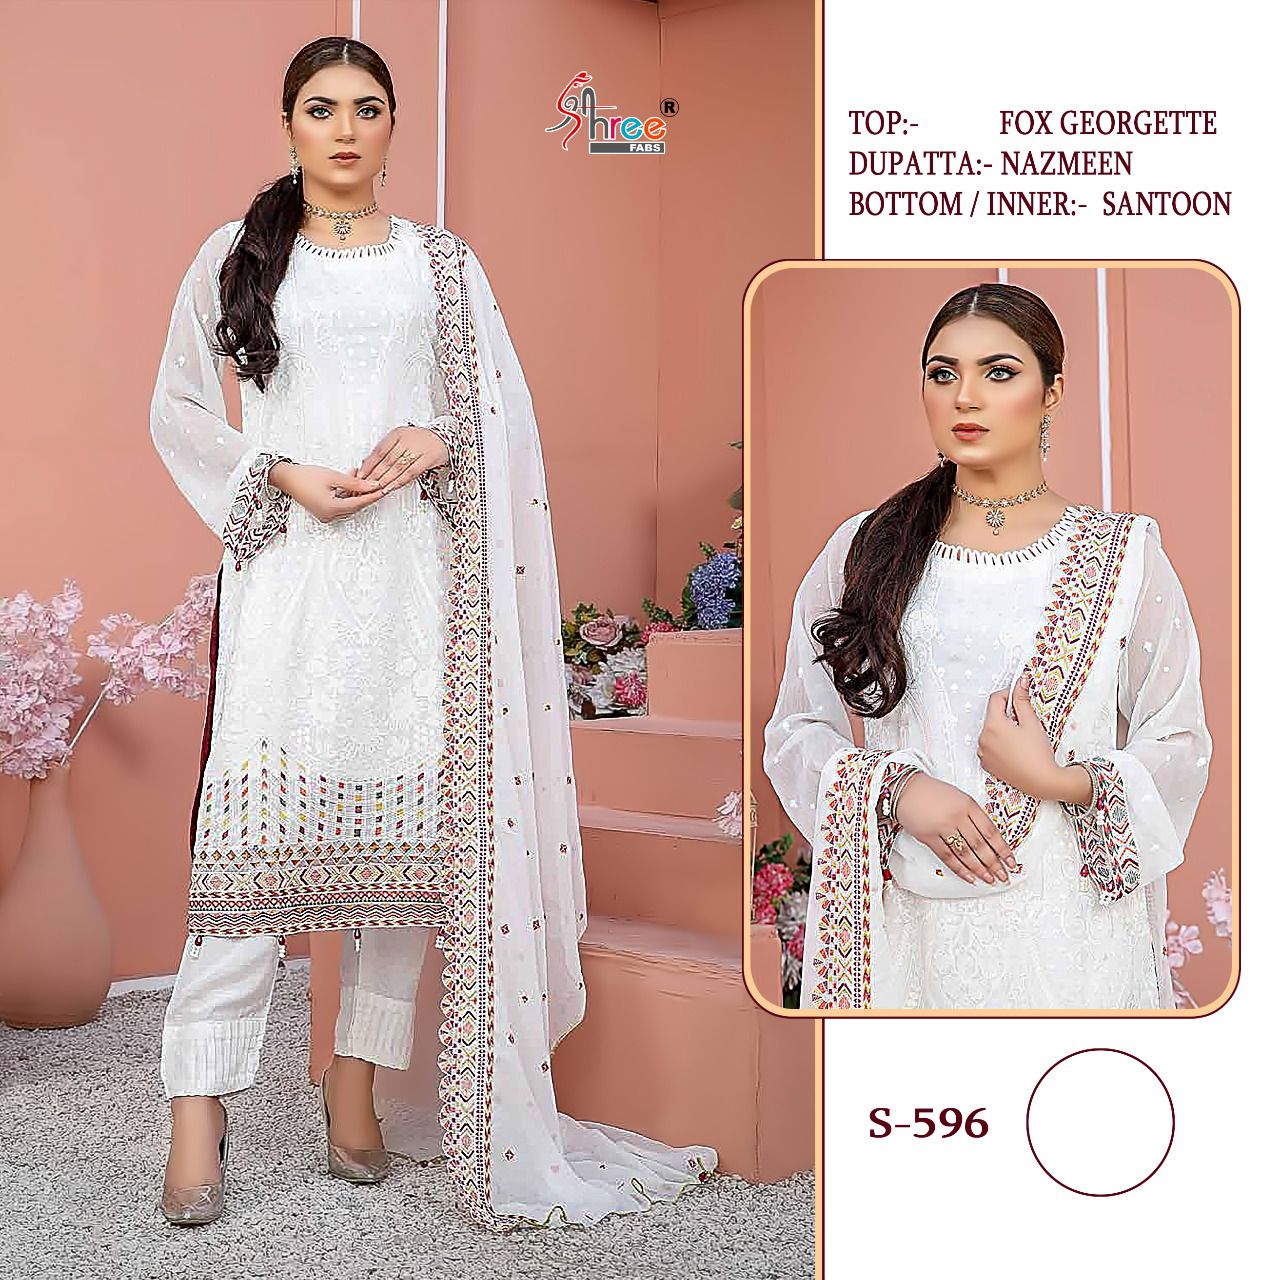 SHREE FABS S 596 PAKISTANI SUITS IN LOWEST PRICE